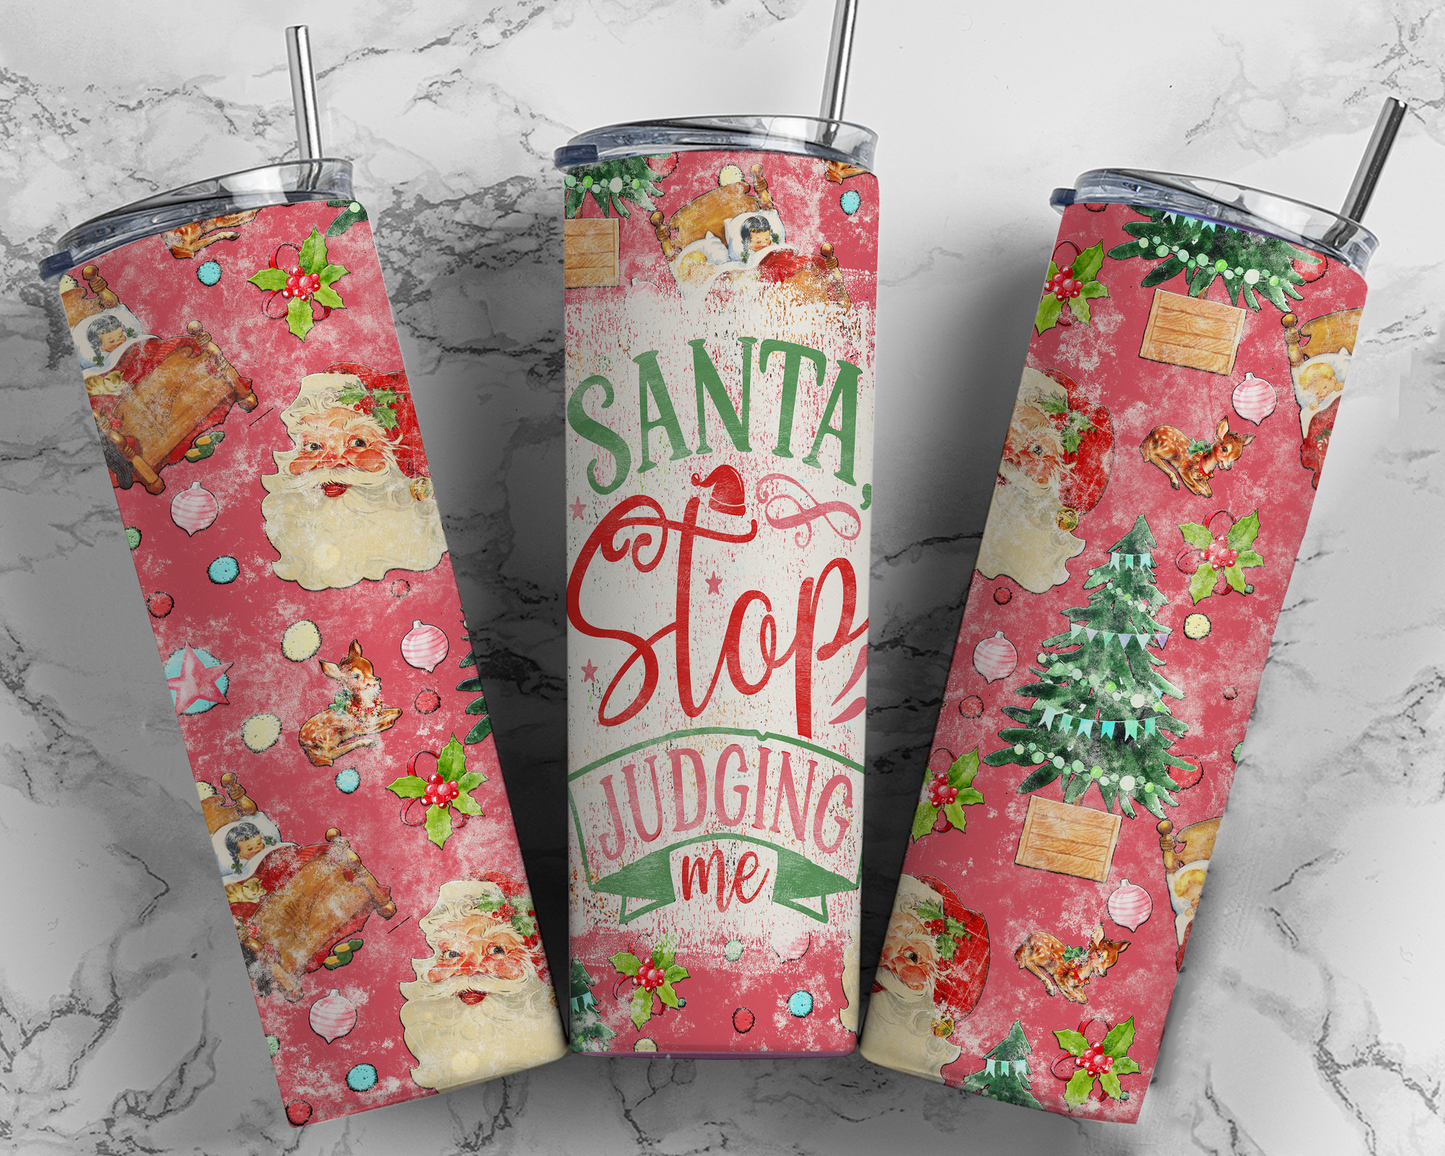 Santa Stop Judging Me: 20oz Sarcastic Tumbler - Funny Christmas Gift for Naughty Souls - Hilarious Beverage Container - Christmas In July